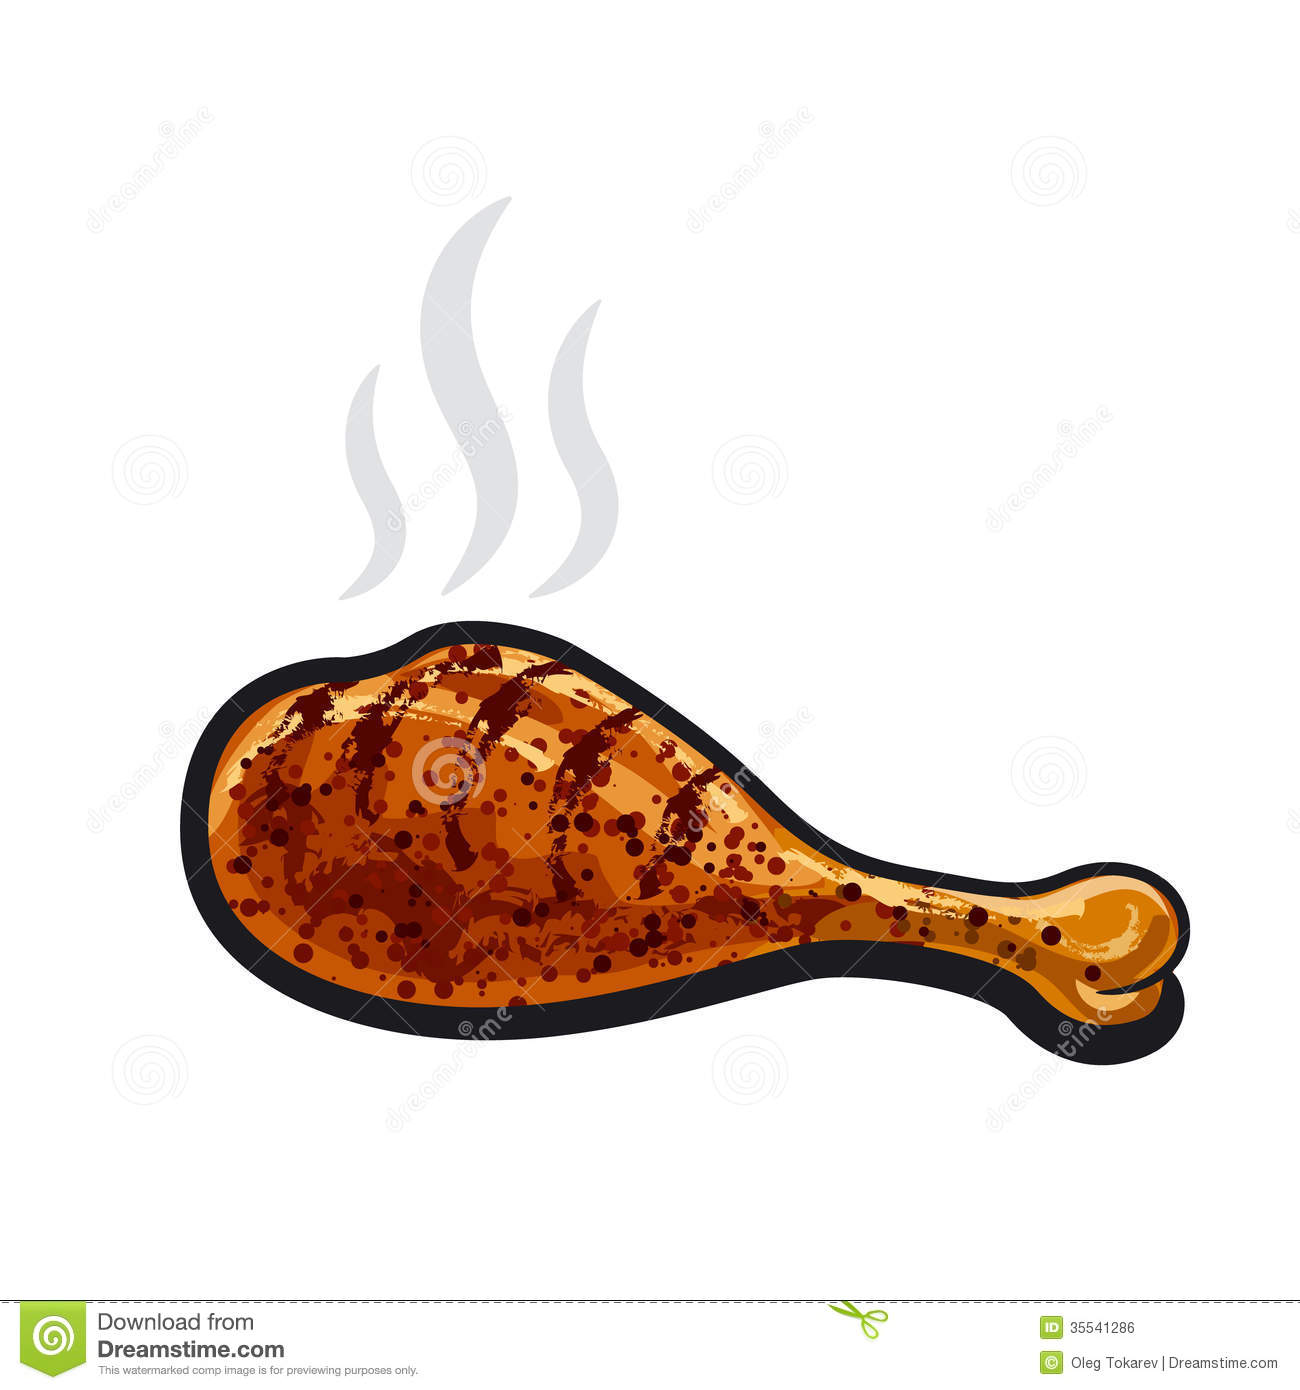 Hot Chicken Drumstick Royalty Free Stock Image   Image  35541286